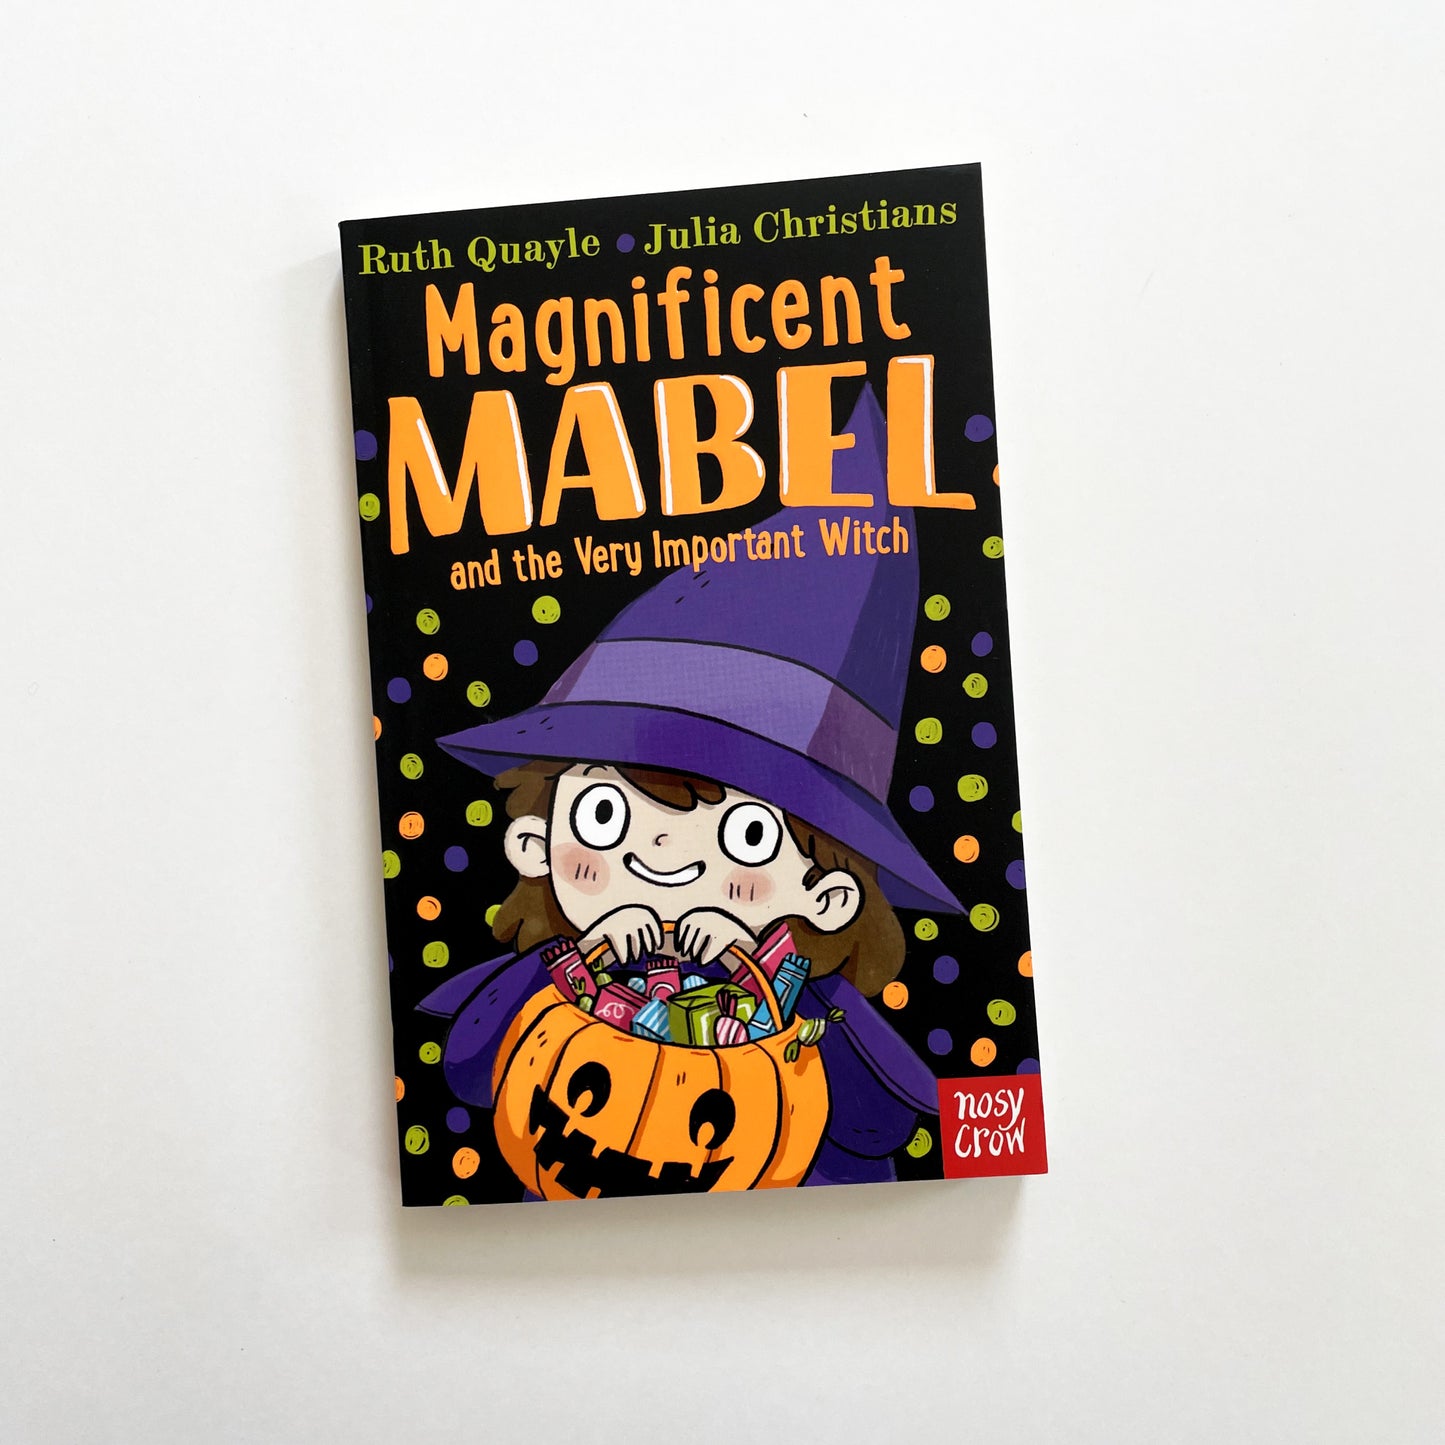 Magnificent Mabel and the Very Important Witch